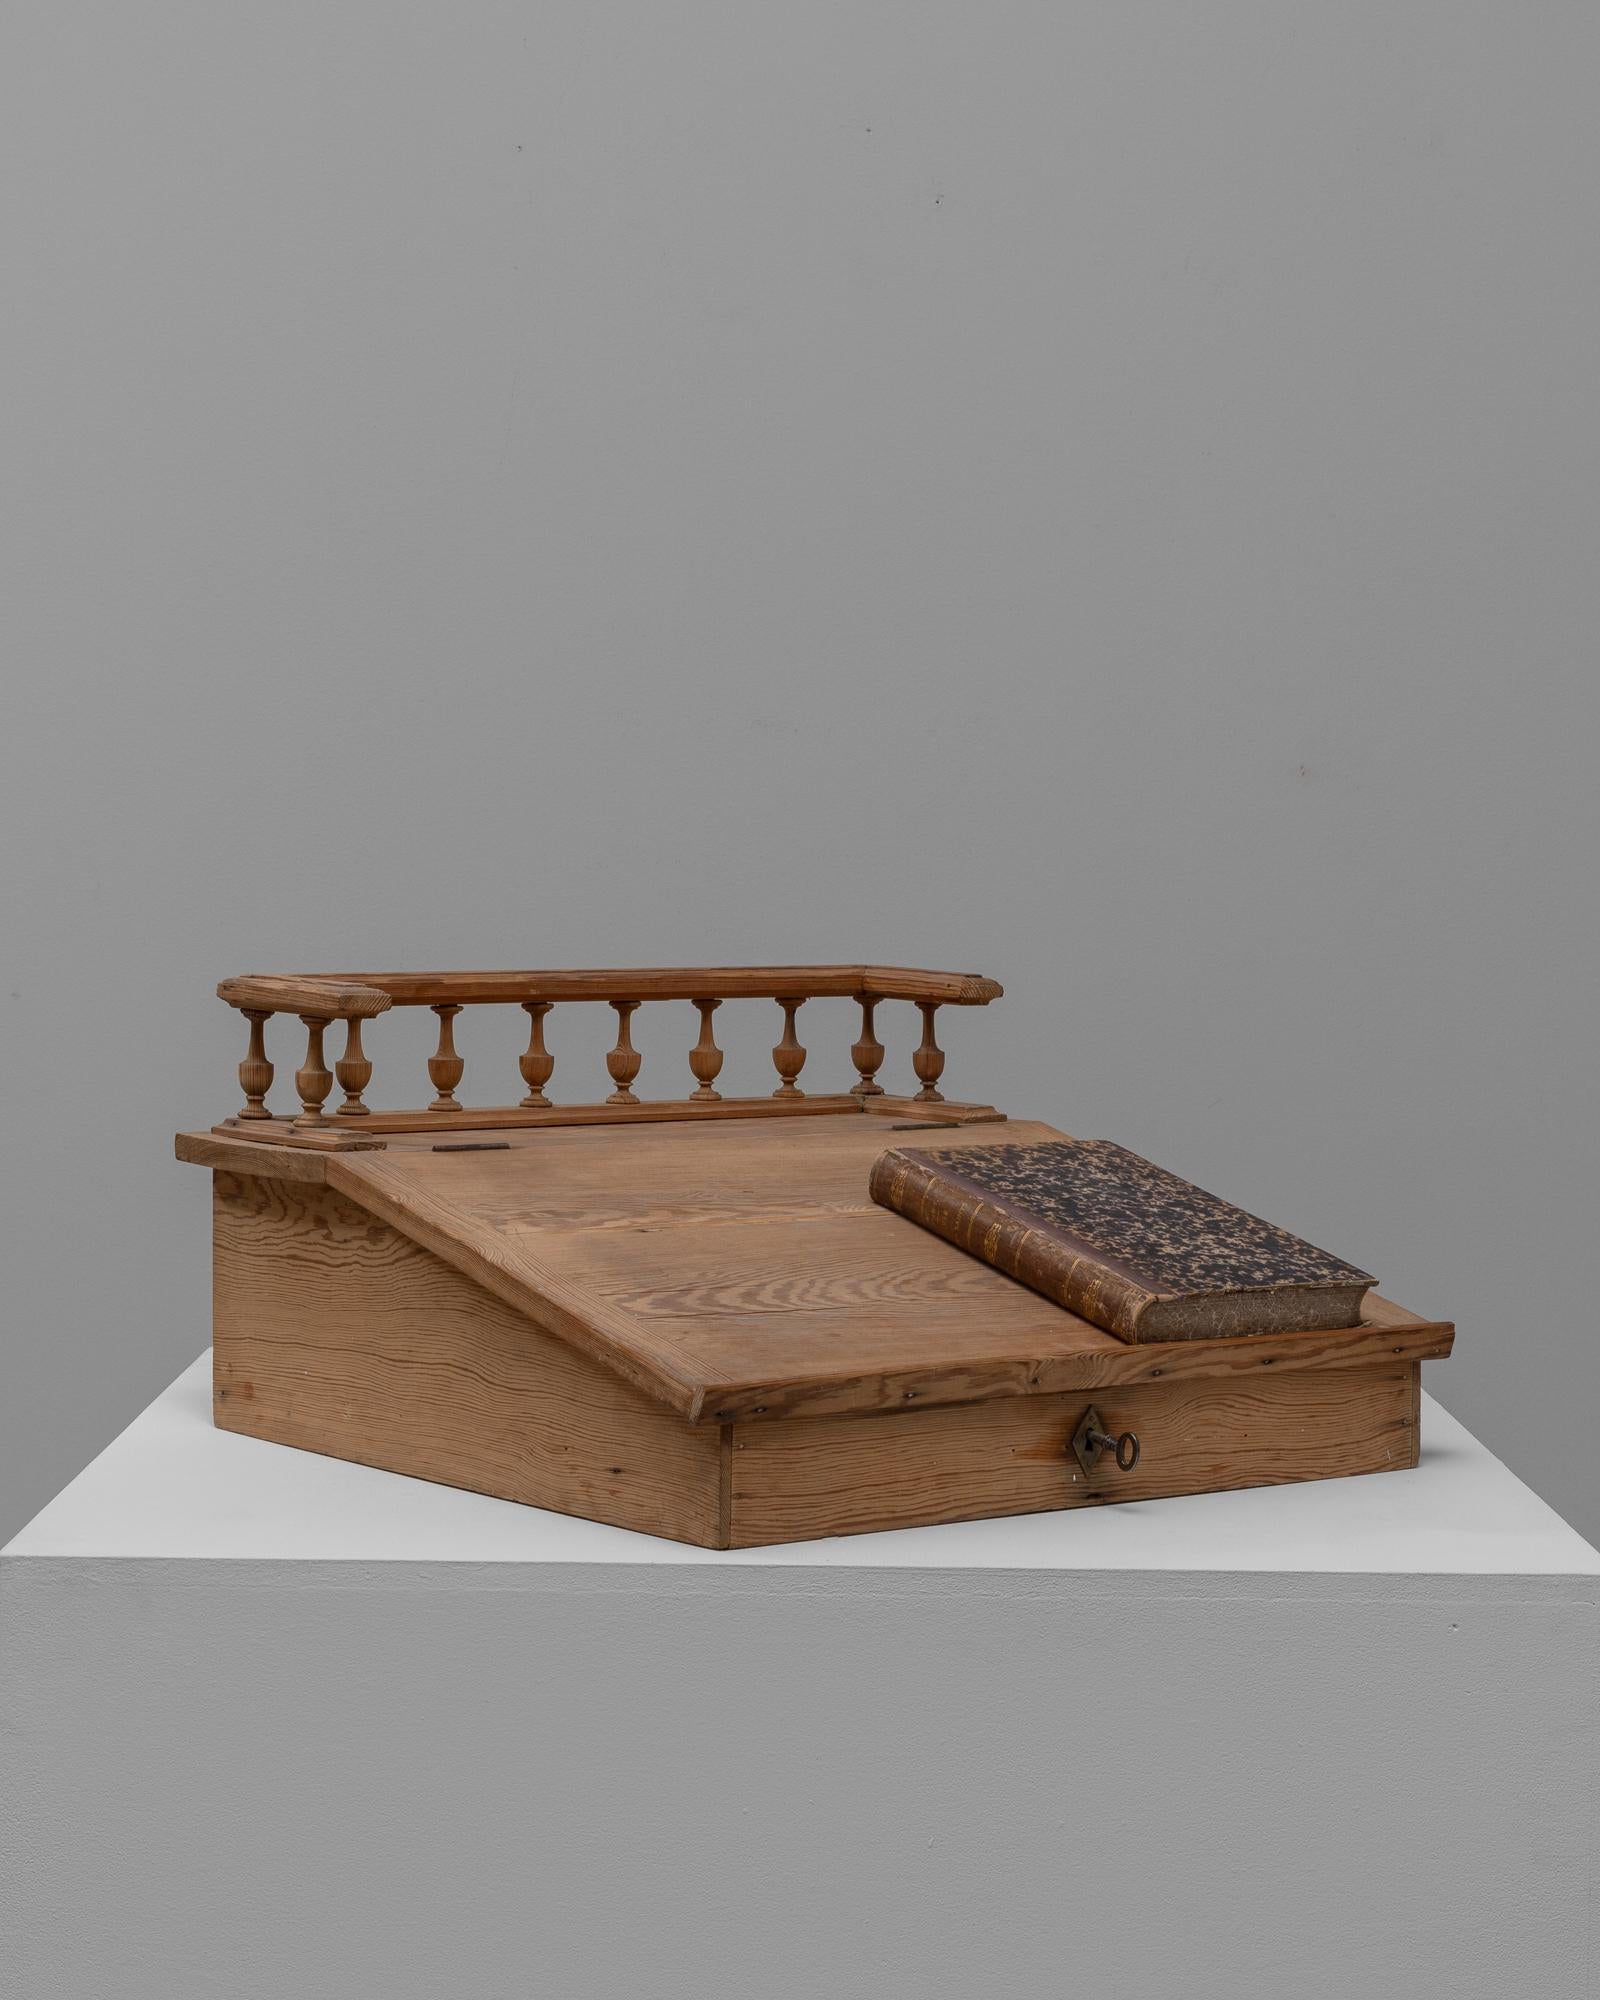 19th Century French Wooden Desk Organizer For Sale 5